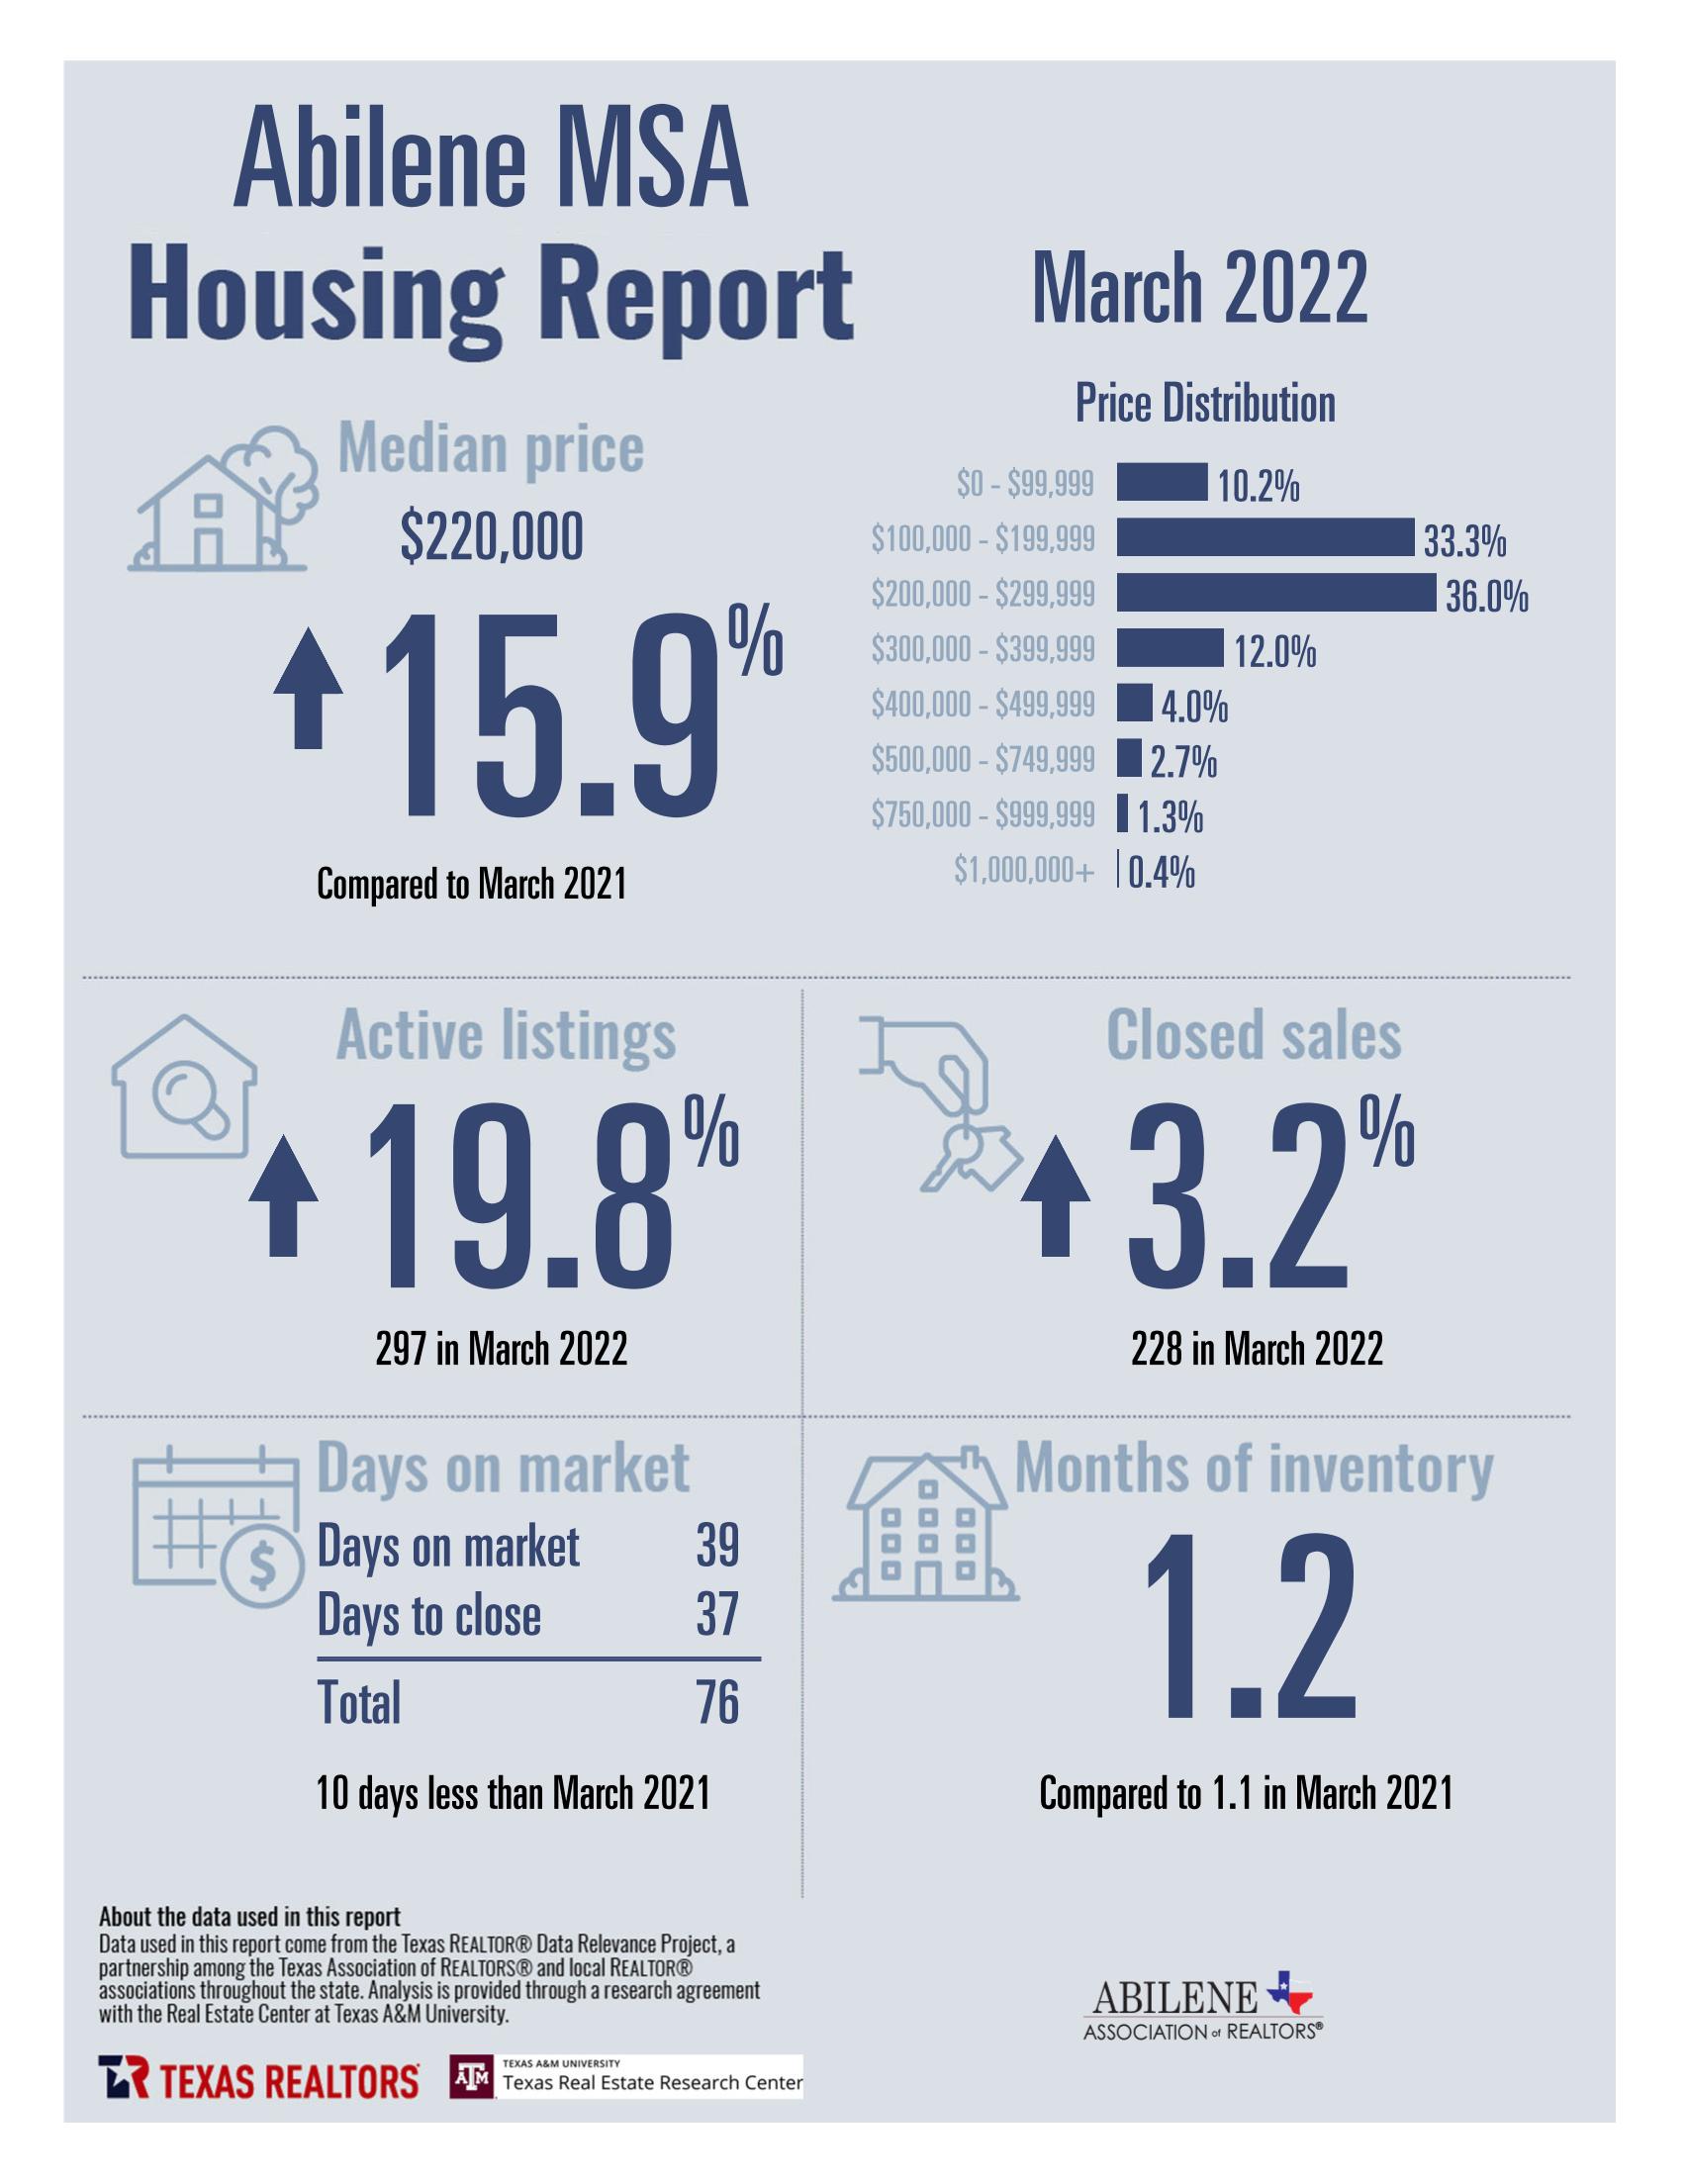 Housing infographic for homes in Abilene, TX for the month of March 2022